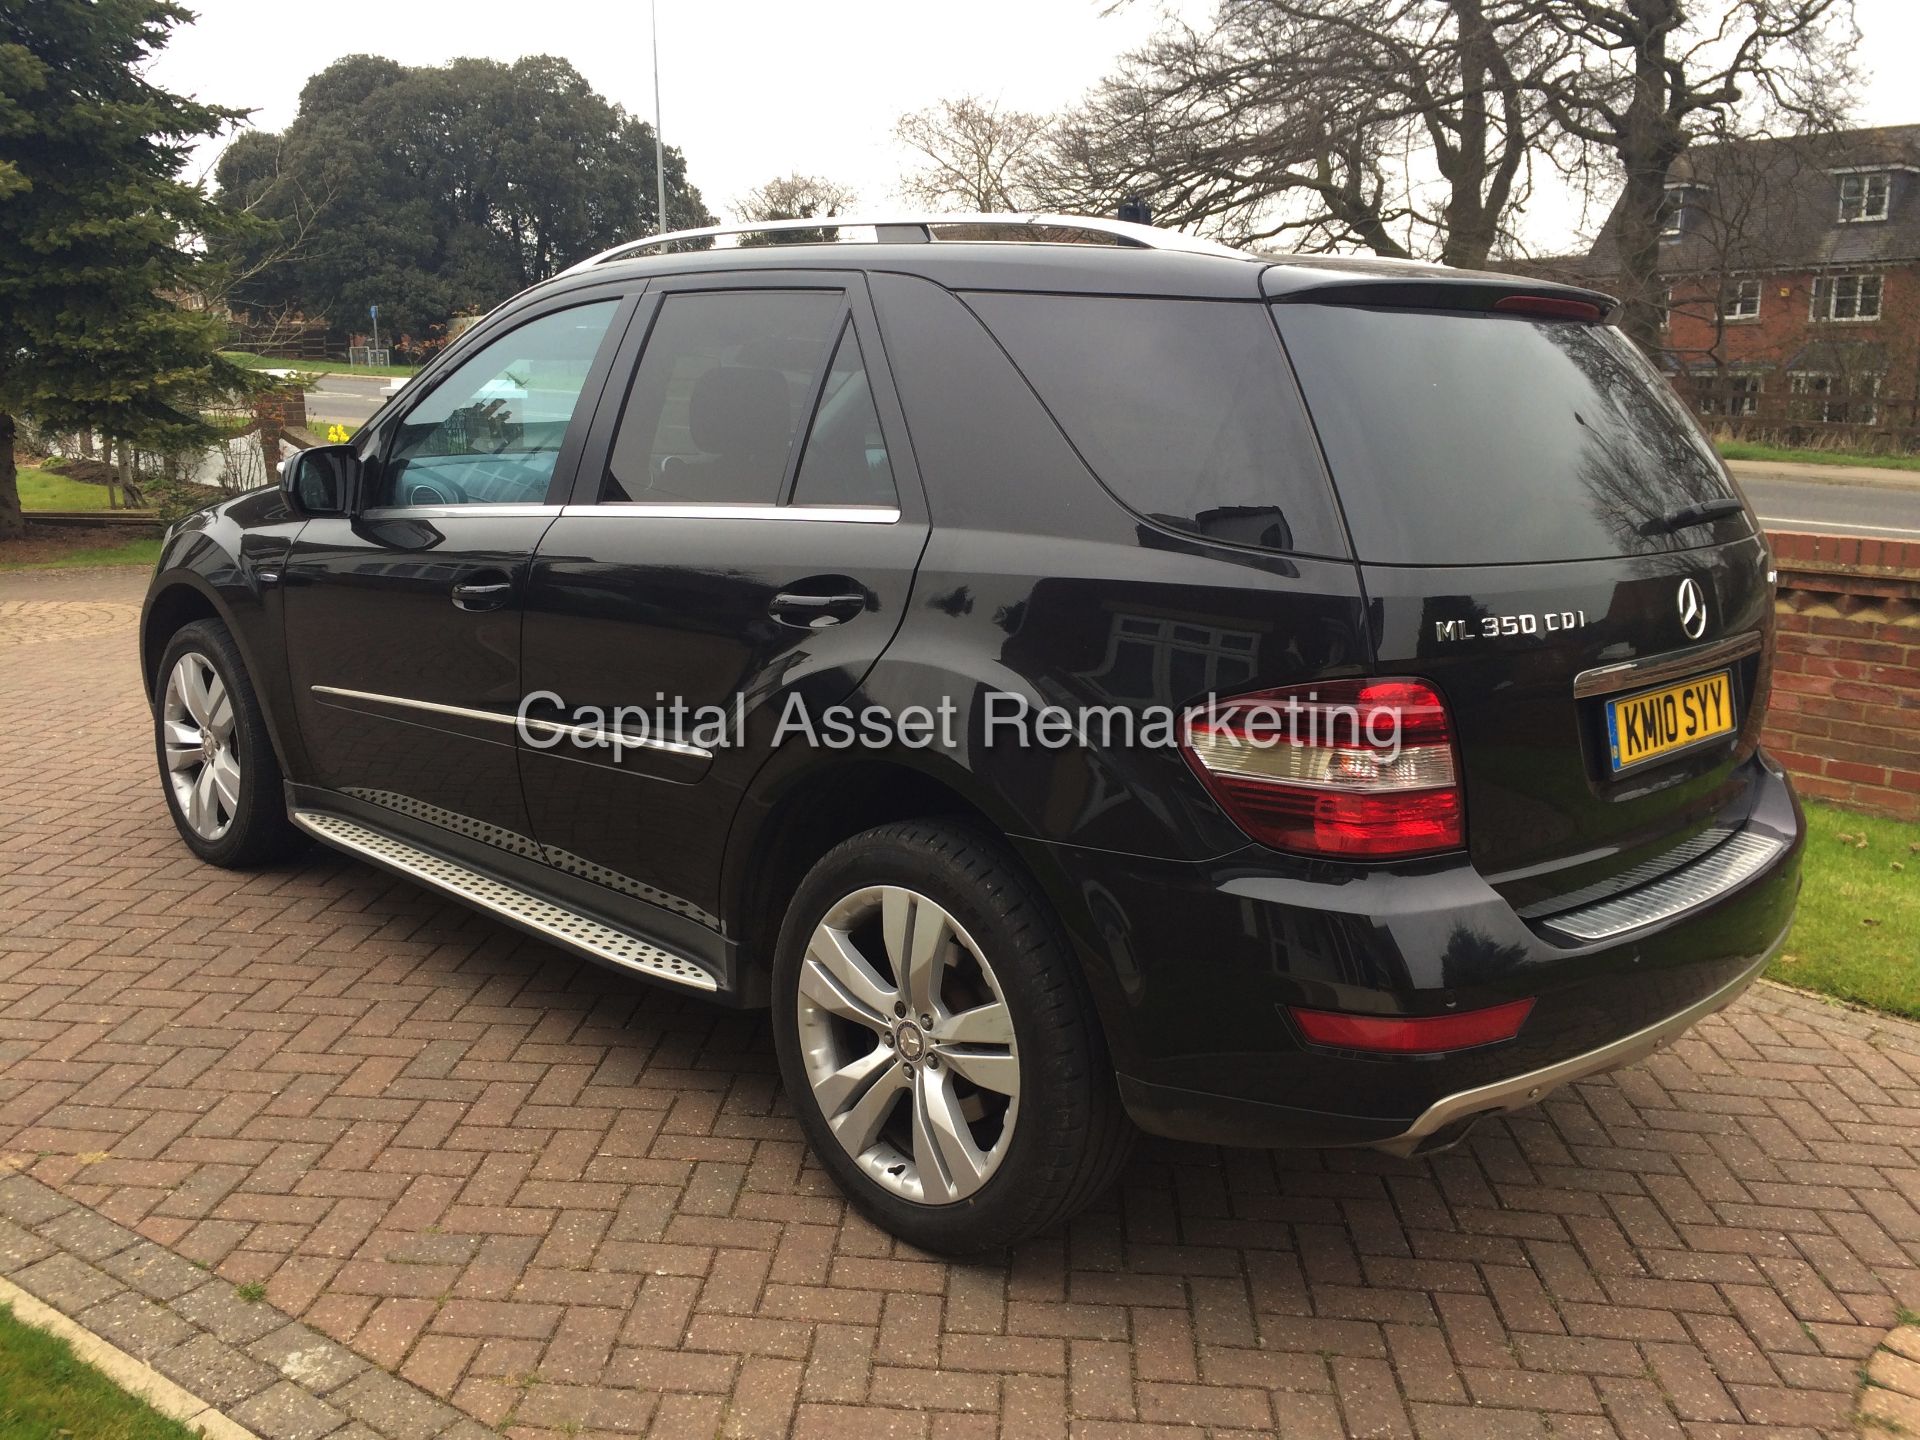 MERCEDES ML 350CDI "SPORT - BLACK EDITION" AUTO / TIP-TRONIC - FULLY LOADED - SAT NAV - STUNNING !!! - Image 5 of 25